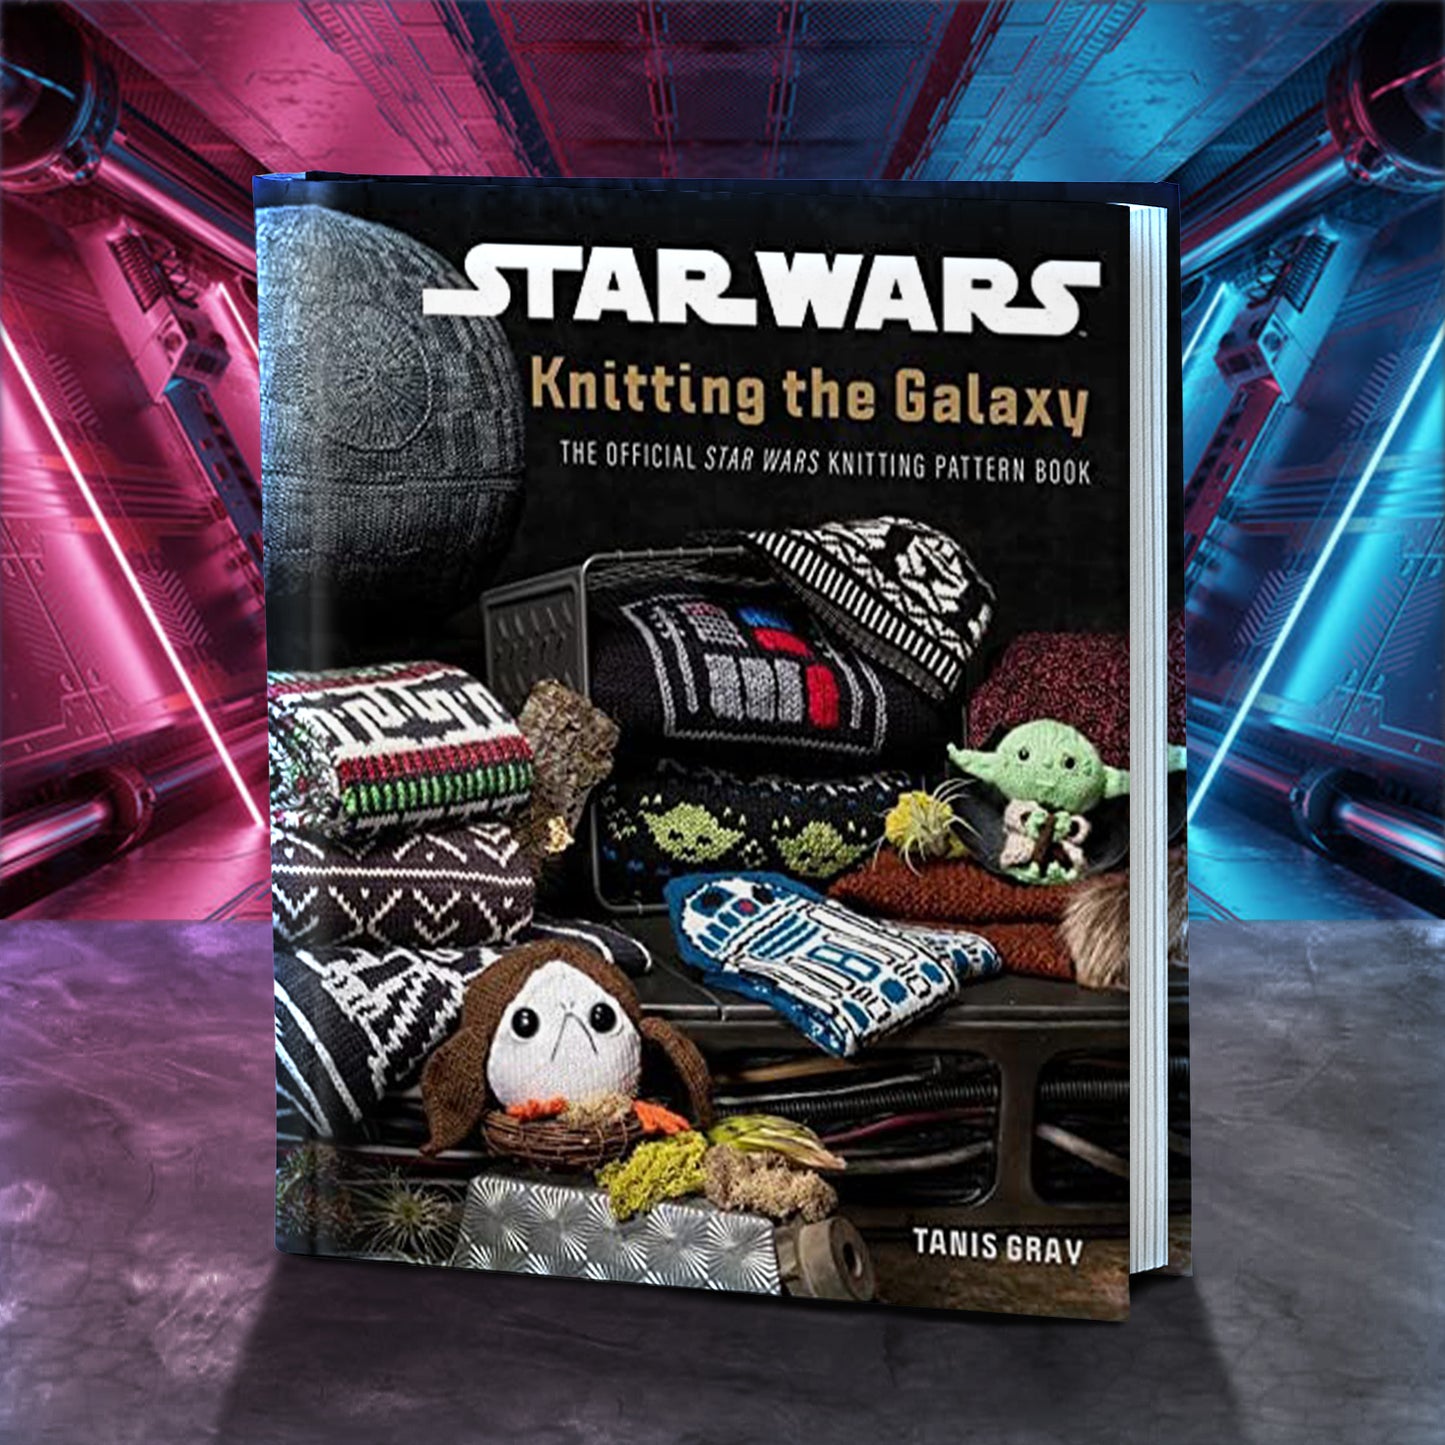 Star Wars Knitting the Galaxy, The Official Star Wars Knitting Pattern Book  - Stranded by the Sea